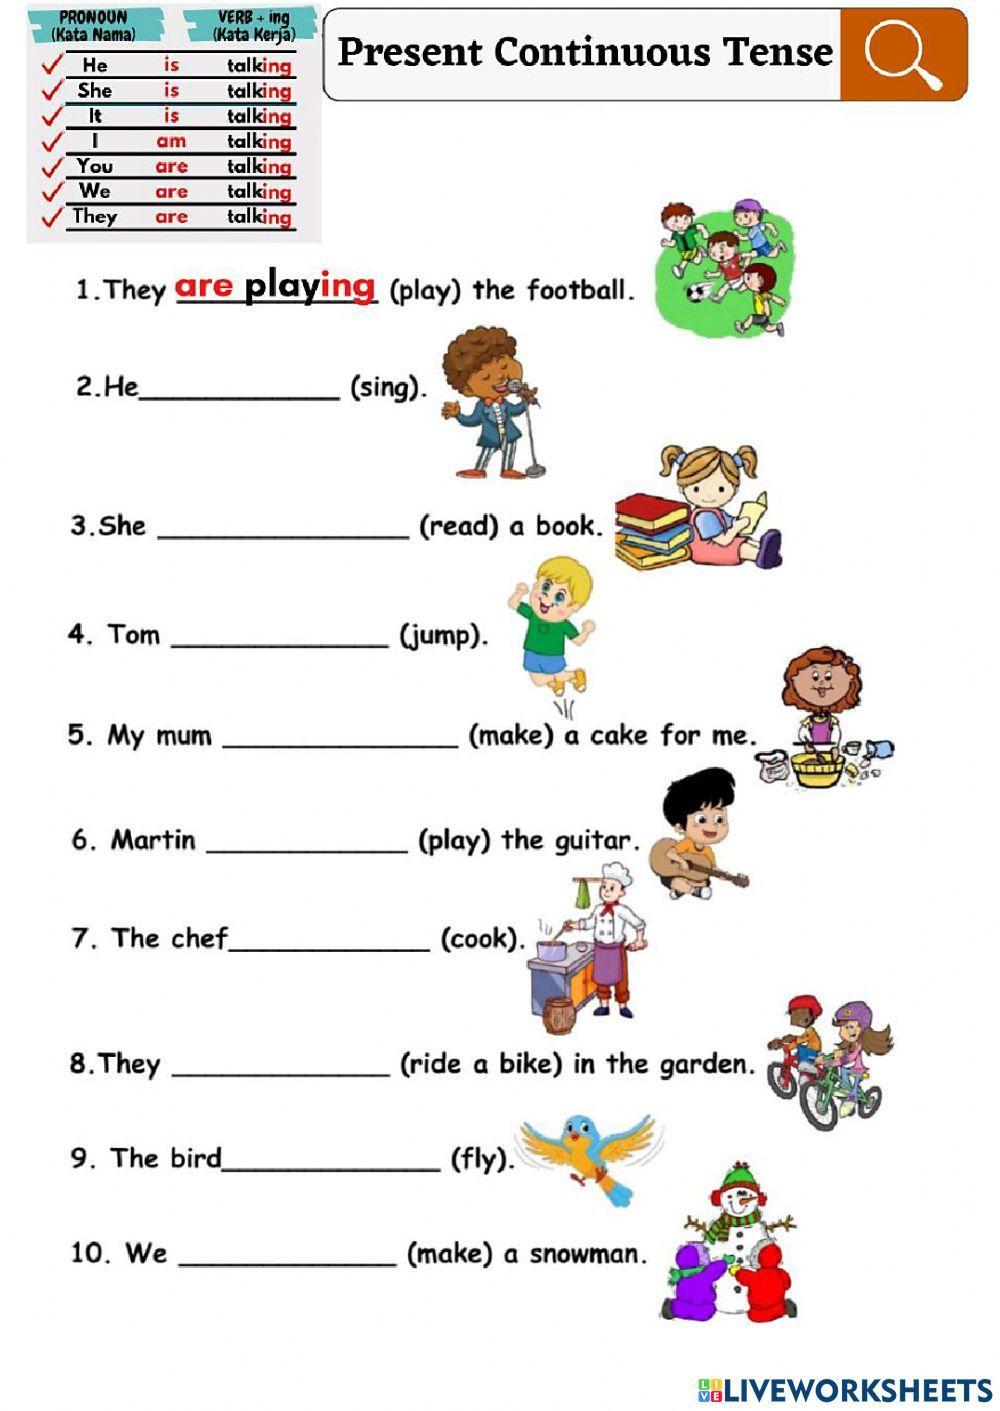 Present continuous tense online exercise for YEAR 4 | Live Worksheets